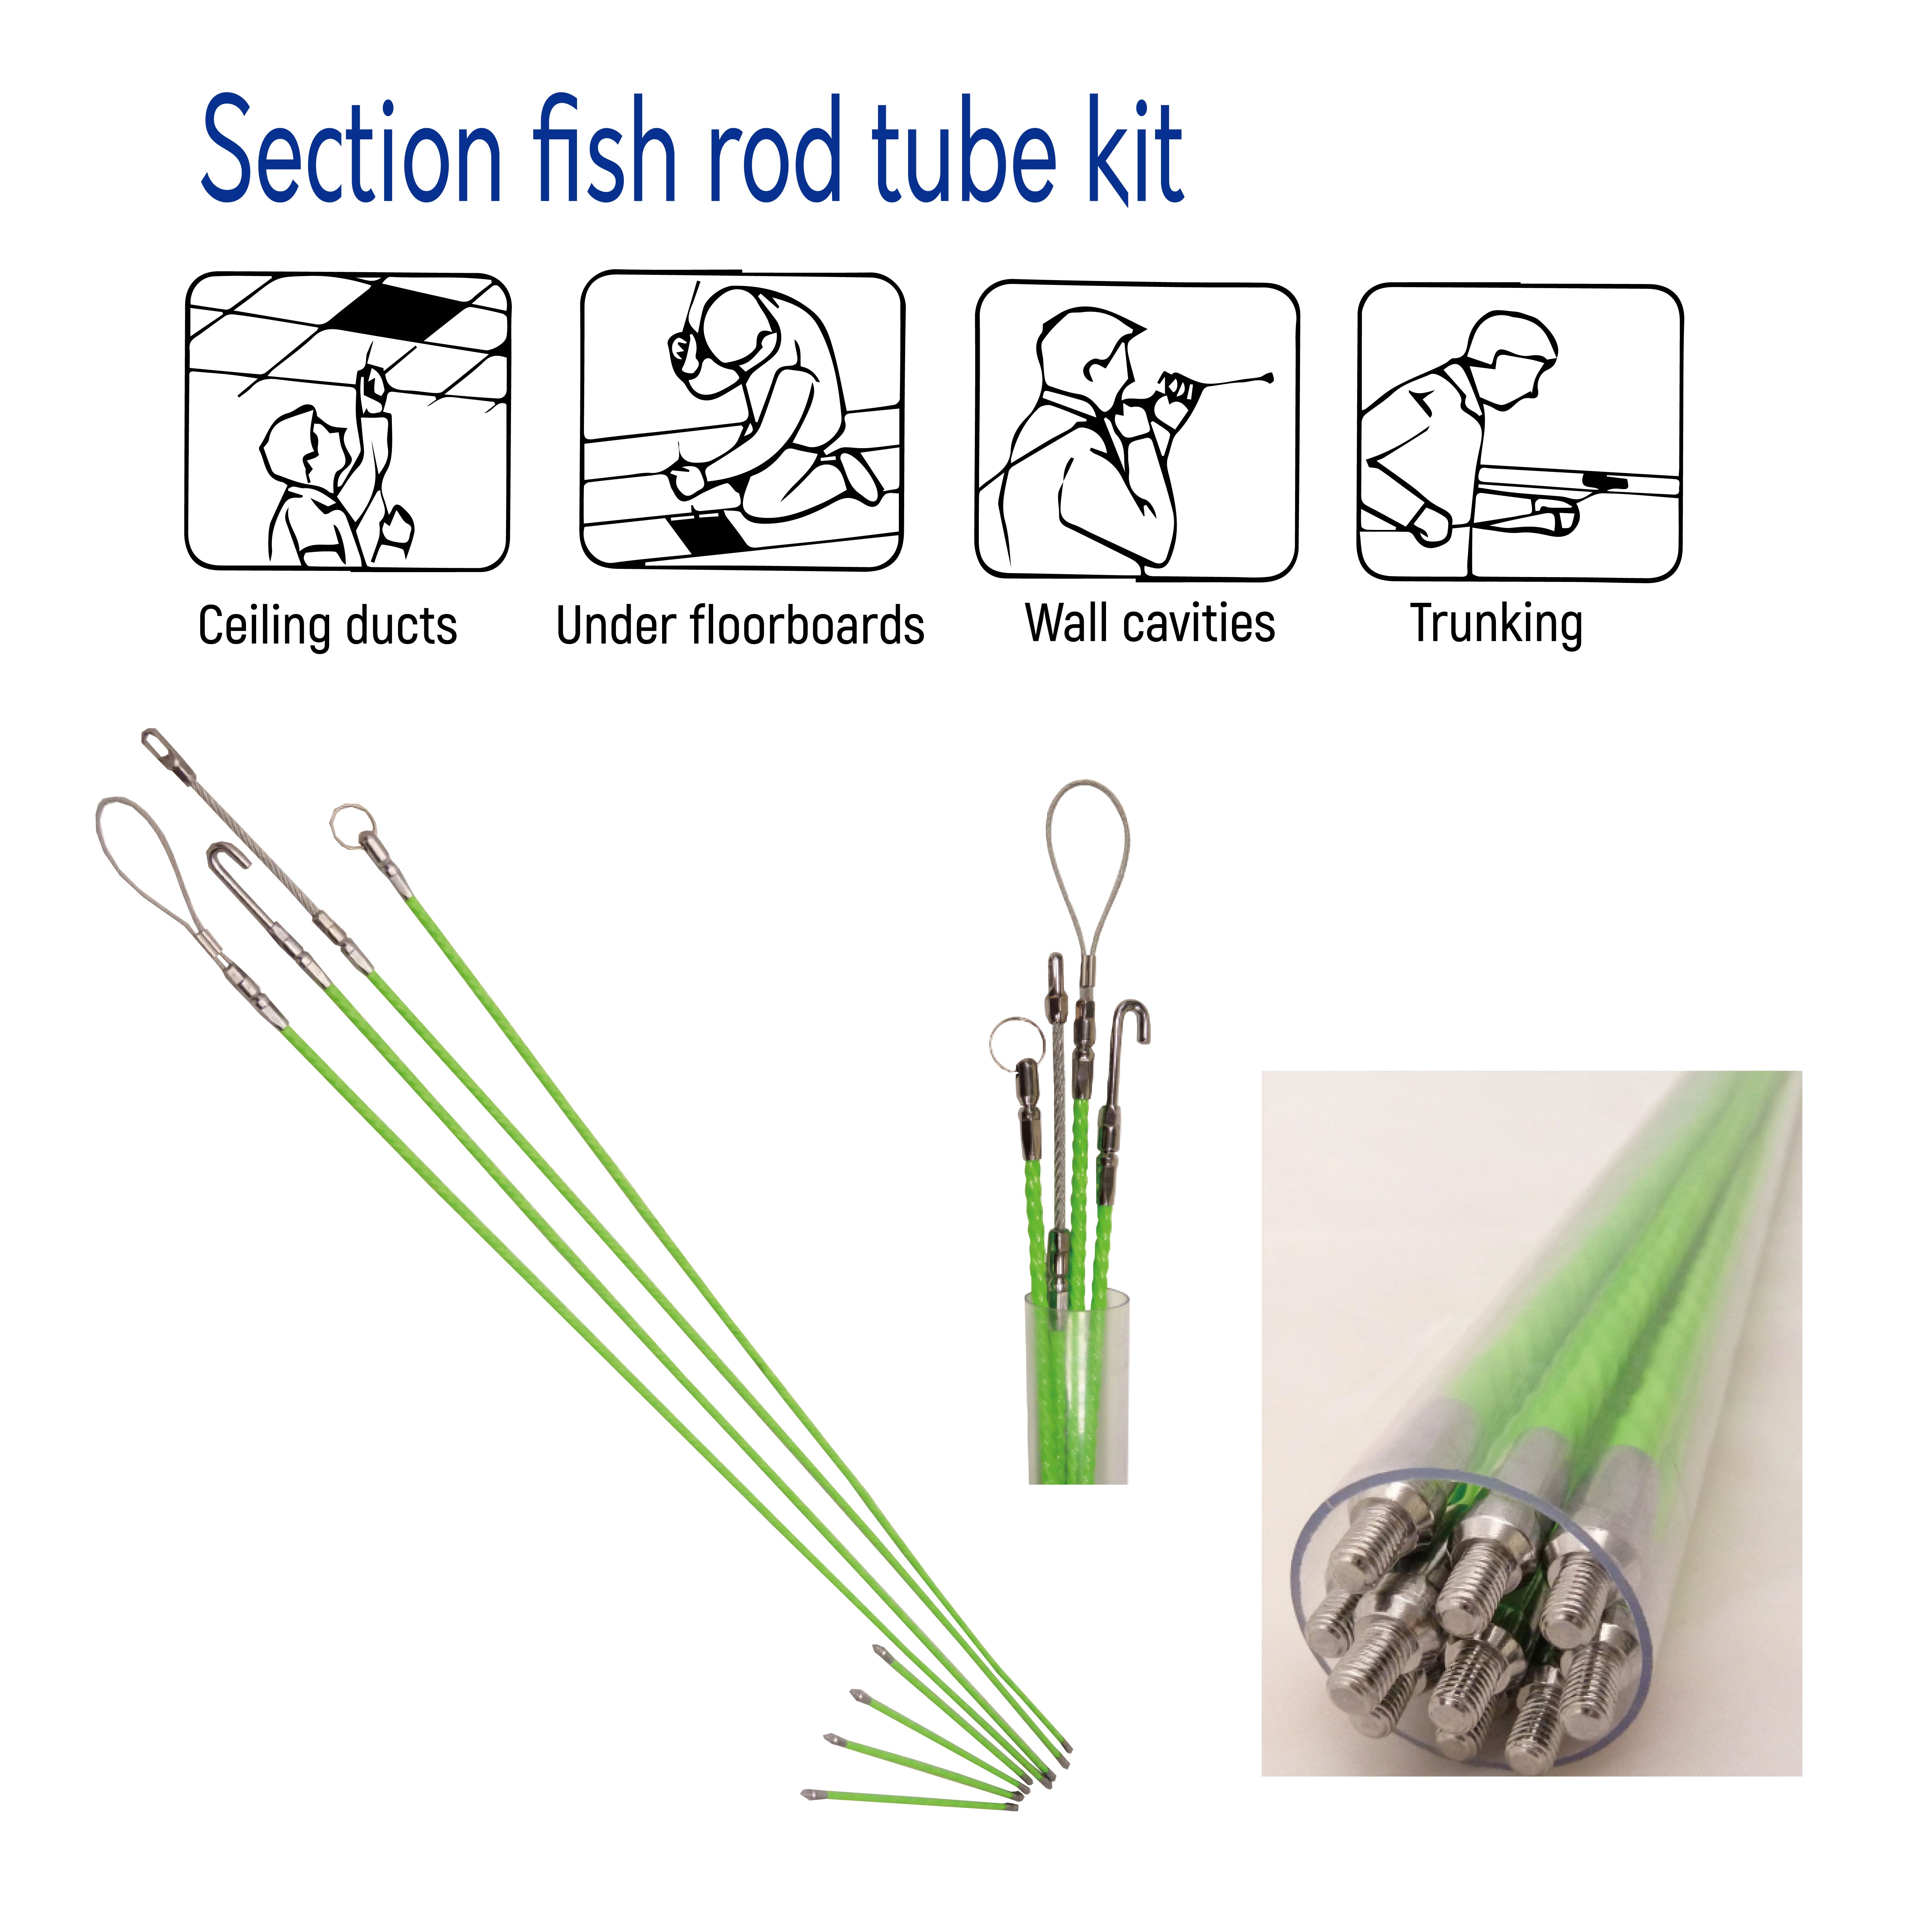 FISH TAPES/ WIRE GUIDERS/ SECTION FISH ROD KIT